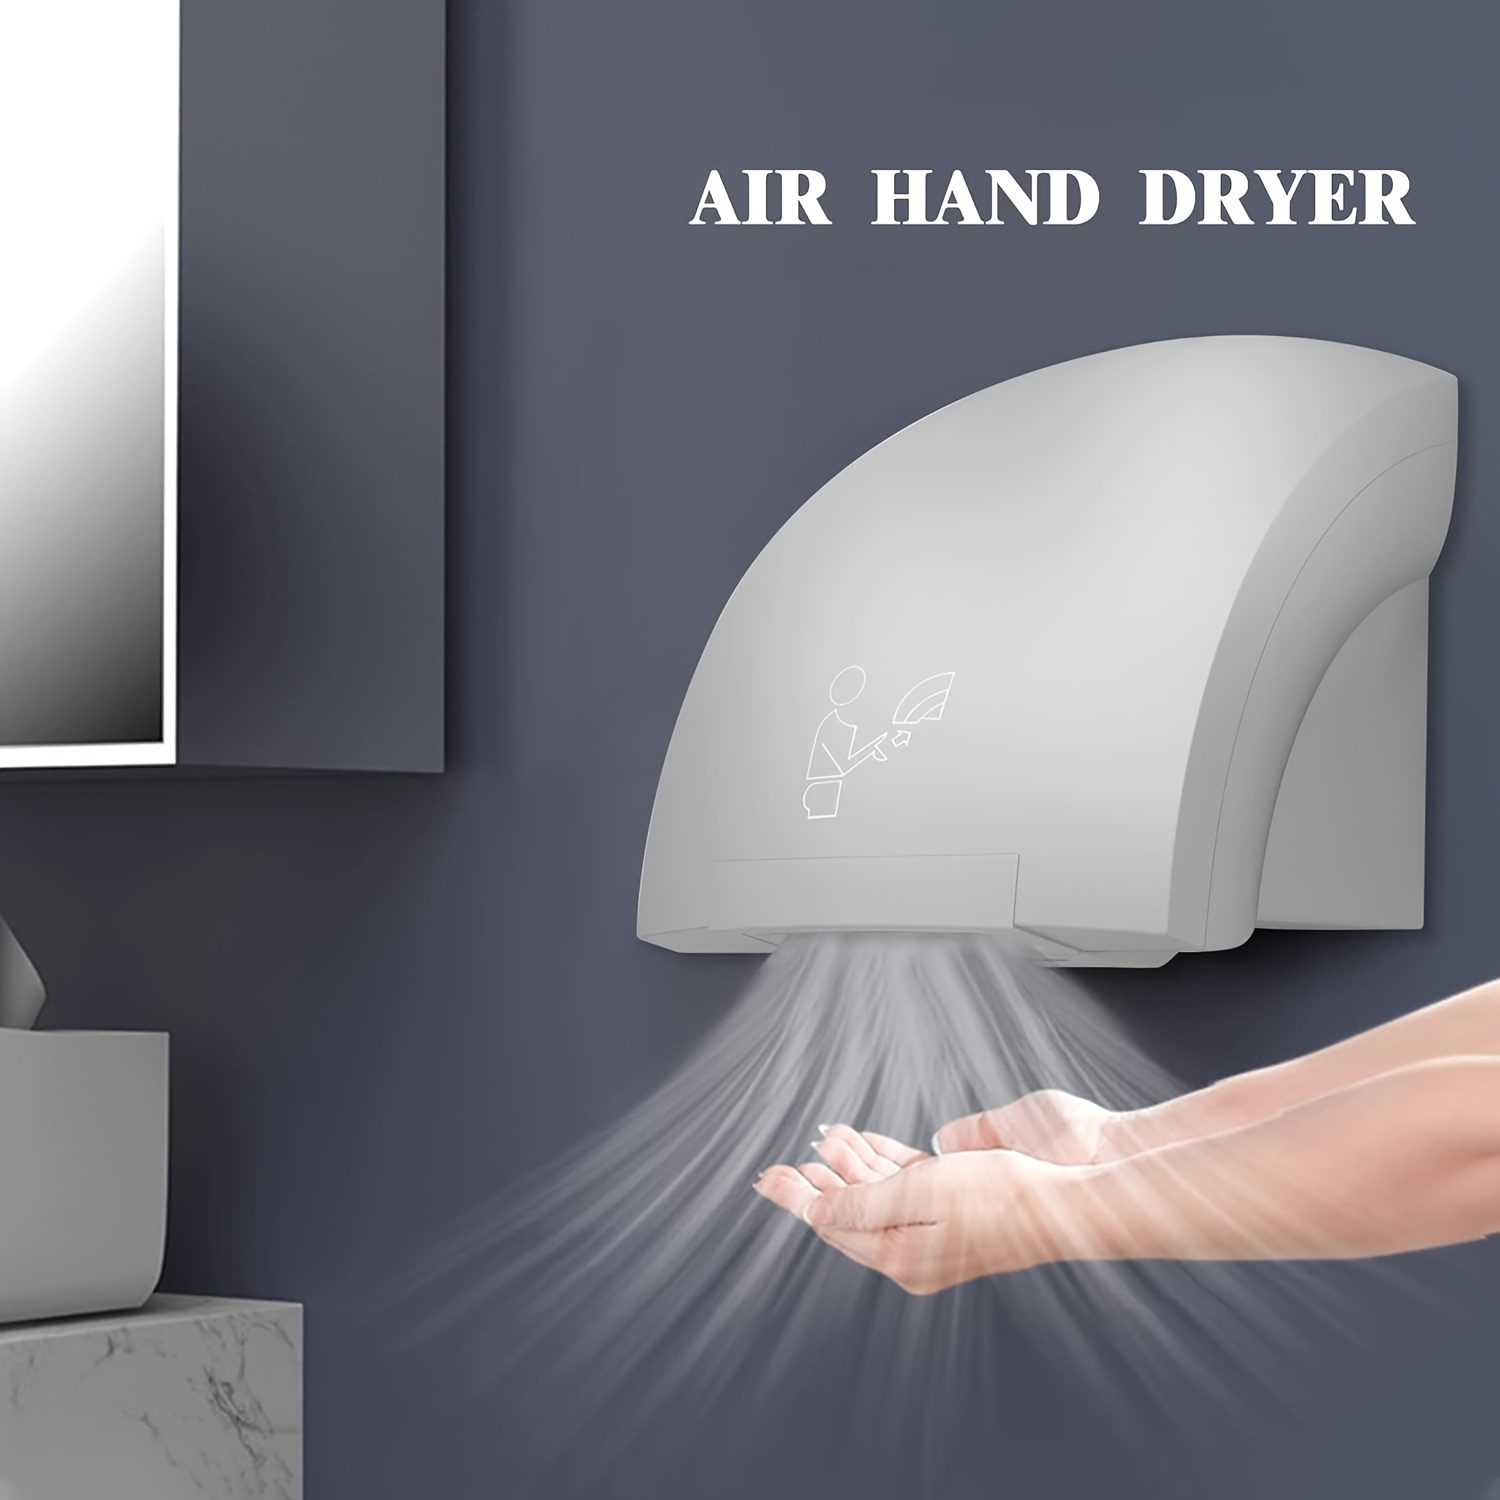 

Hand Dryer Commercial 110v Automatic Compact High Speed Air Wiper For Industry Business Restrooms Us Plug